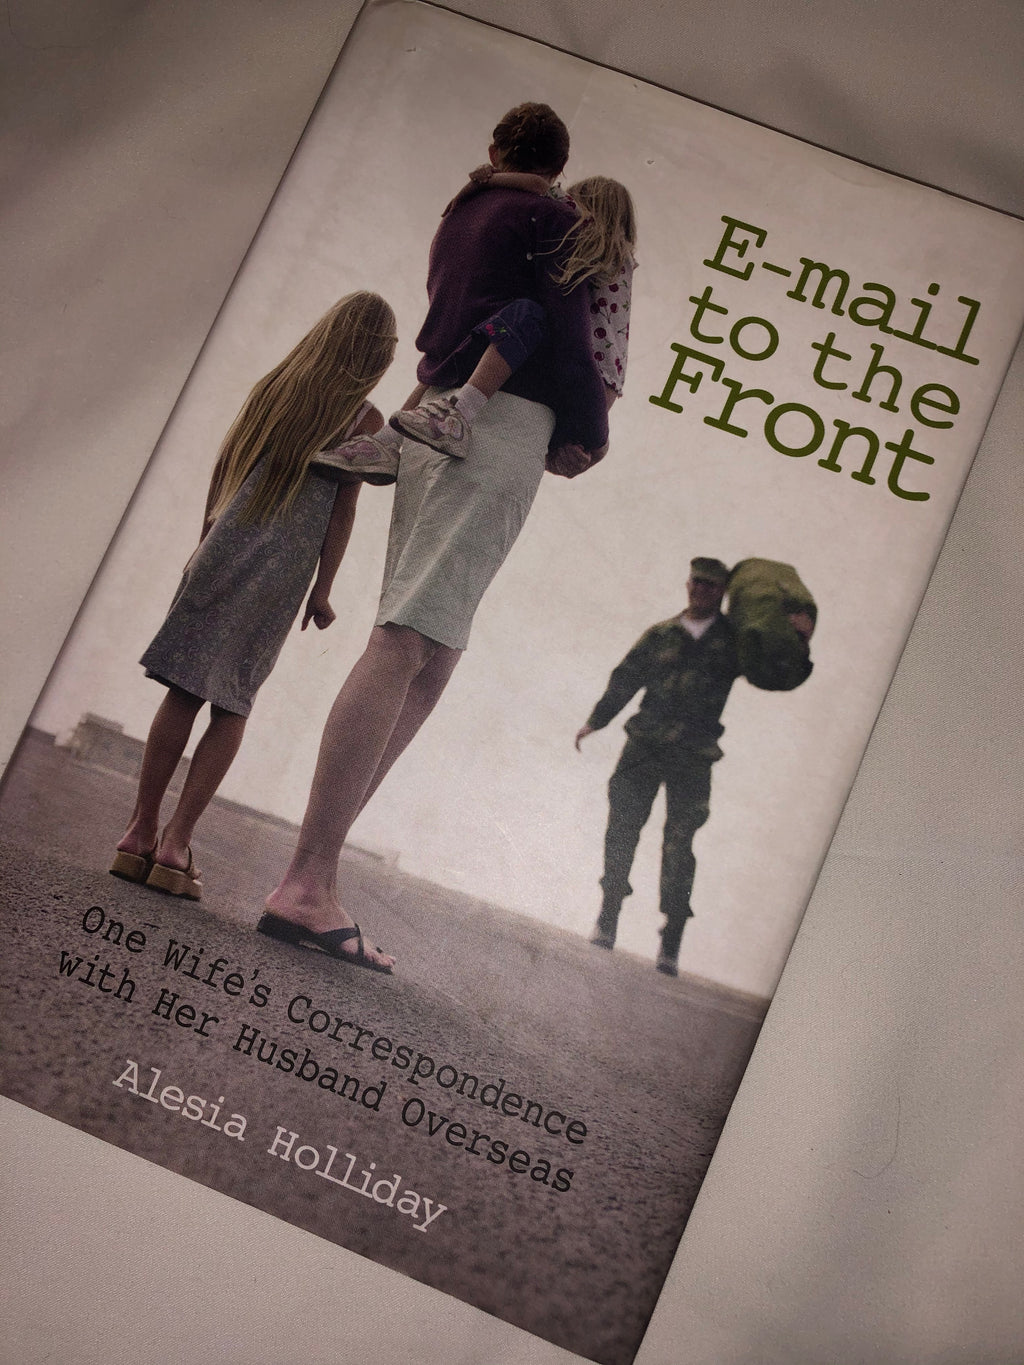 E-mail to the Front- By Alesia Holliday